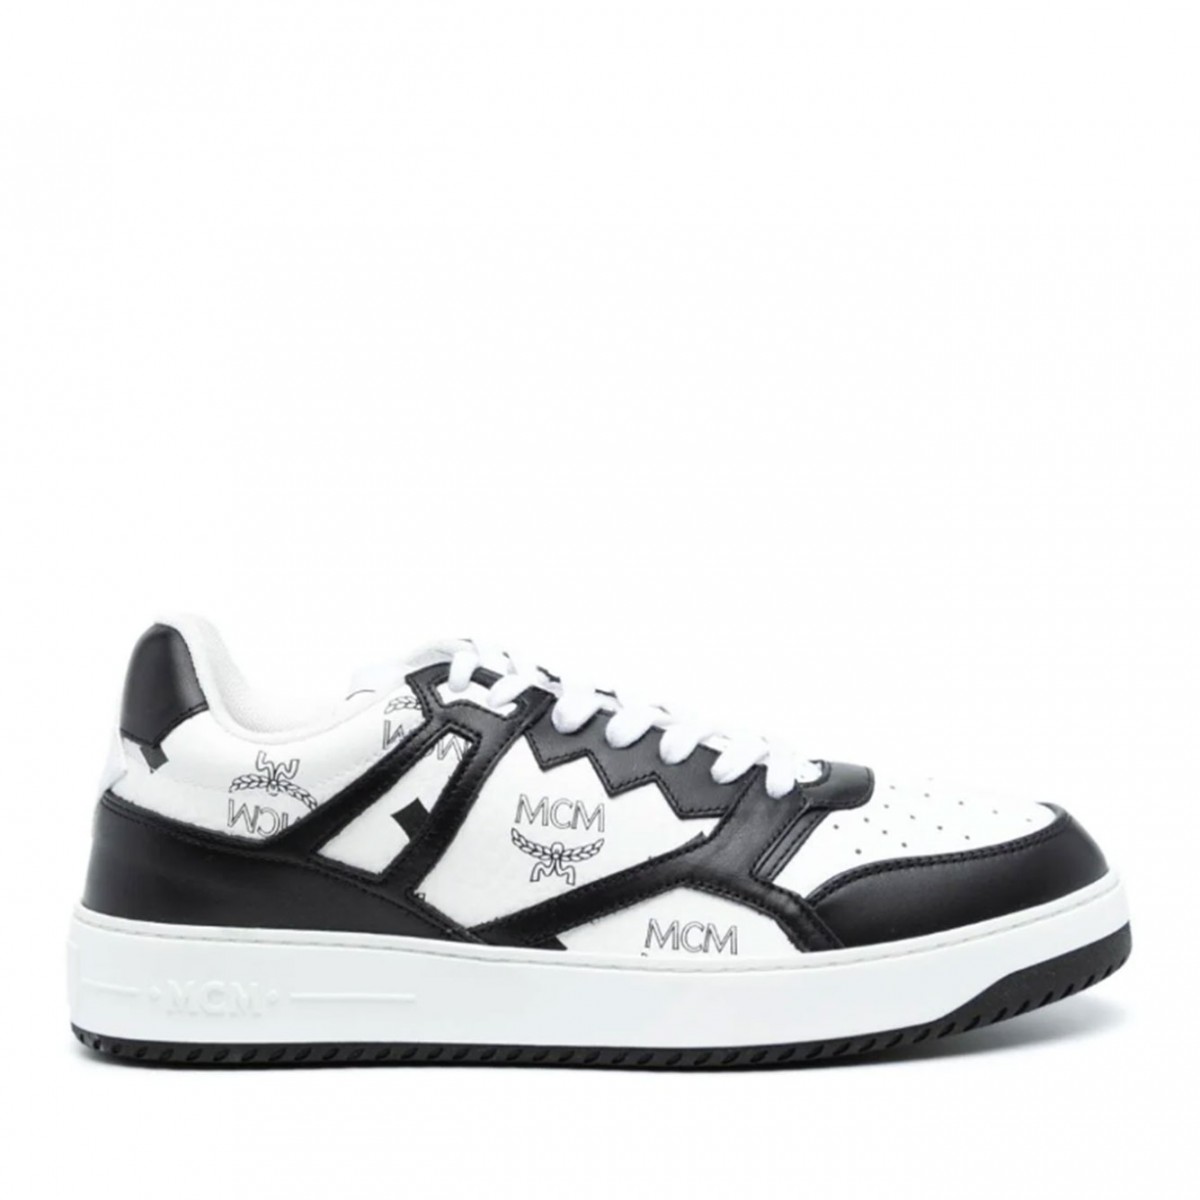 White and Black Neo Derby Visetos Sneakers